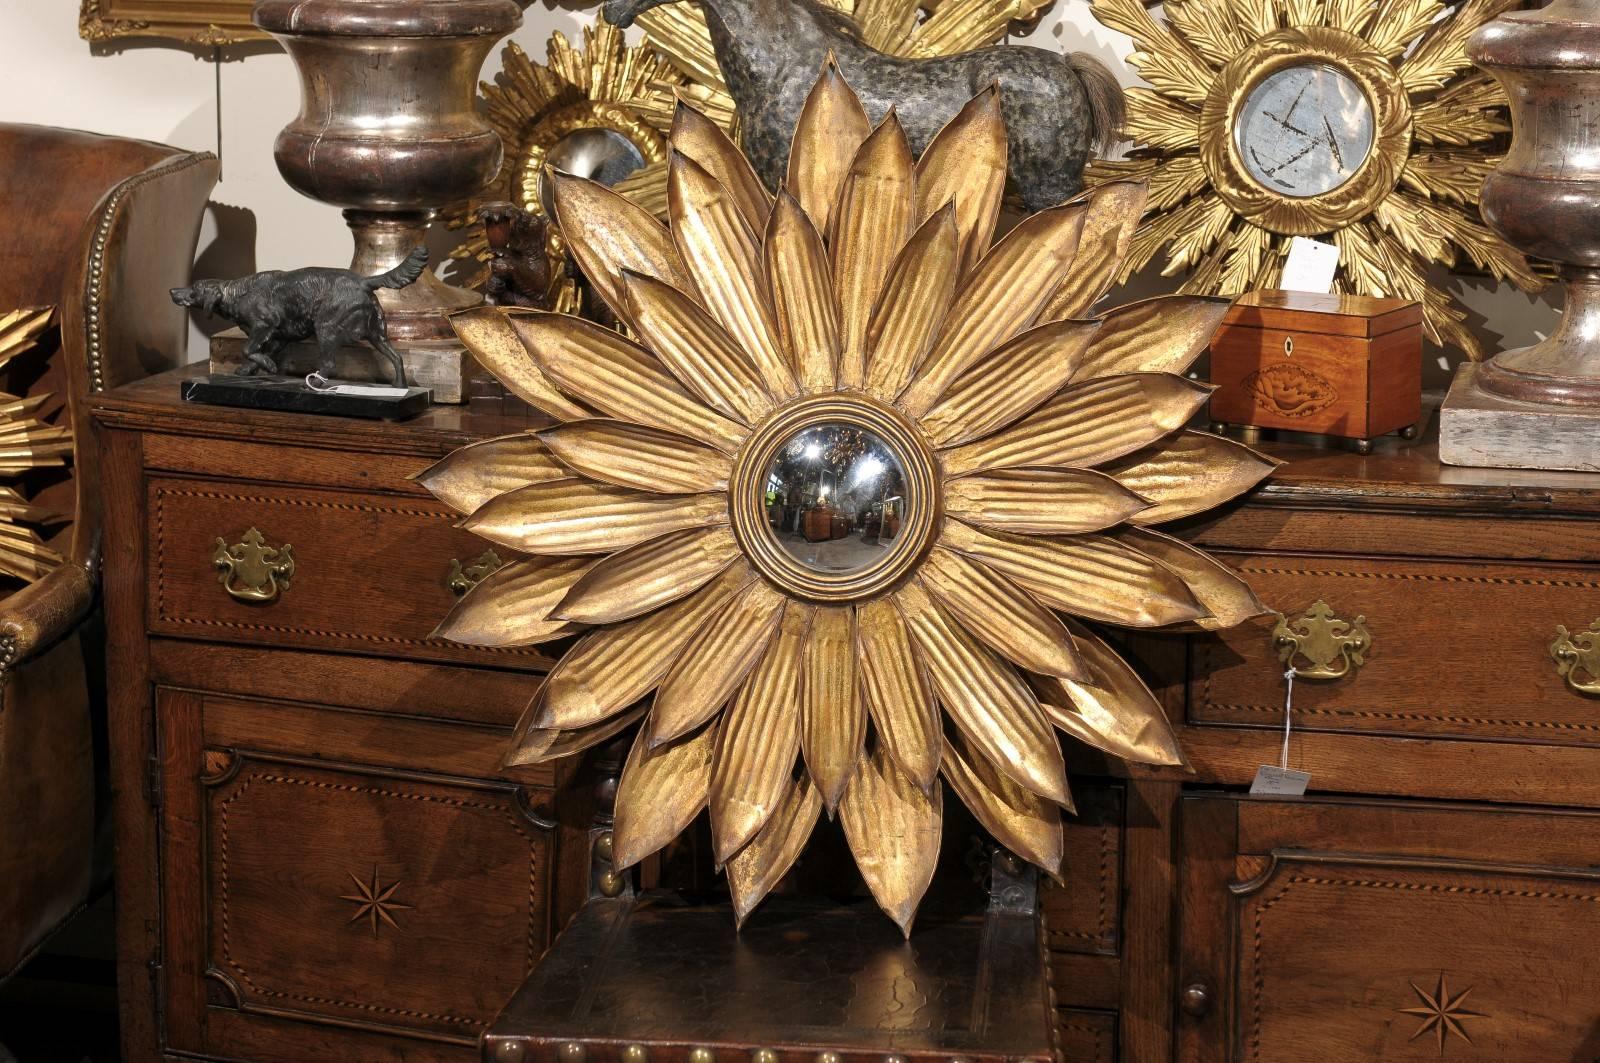 This Spanish sunburst mirror features a circular gilt metal frame with three layers of pointed ribbed petals around a three-banded inner molding enclosing a convex round mirror plate. The figured radiating rays of sunshine can either evoke religious